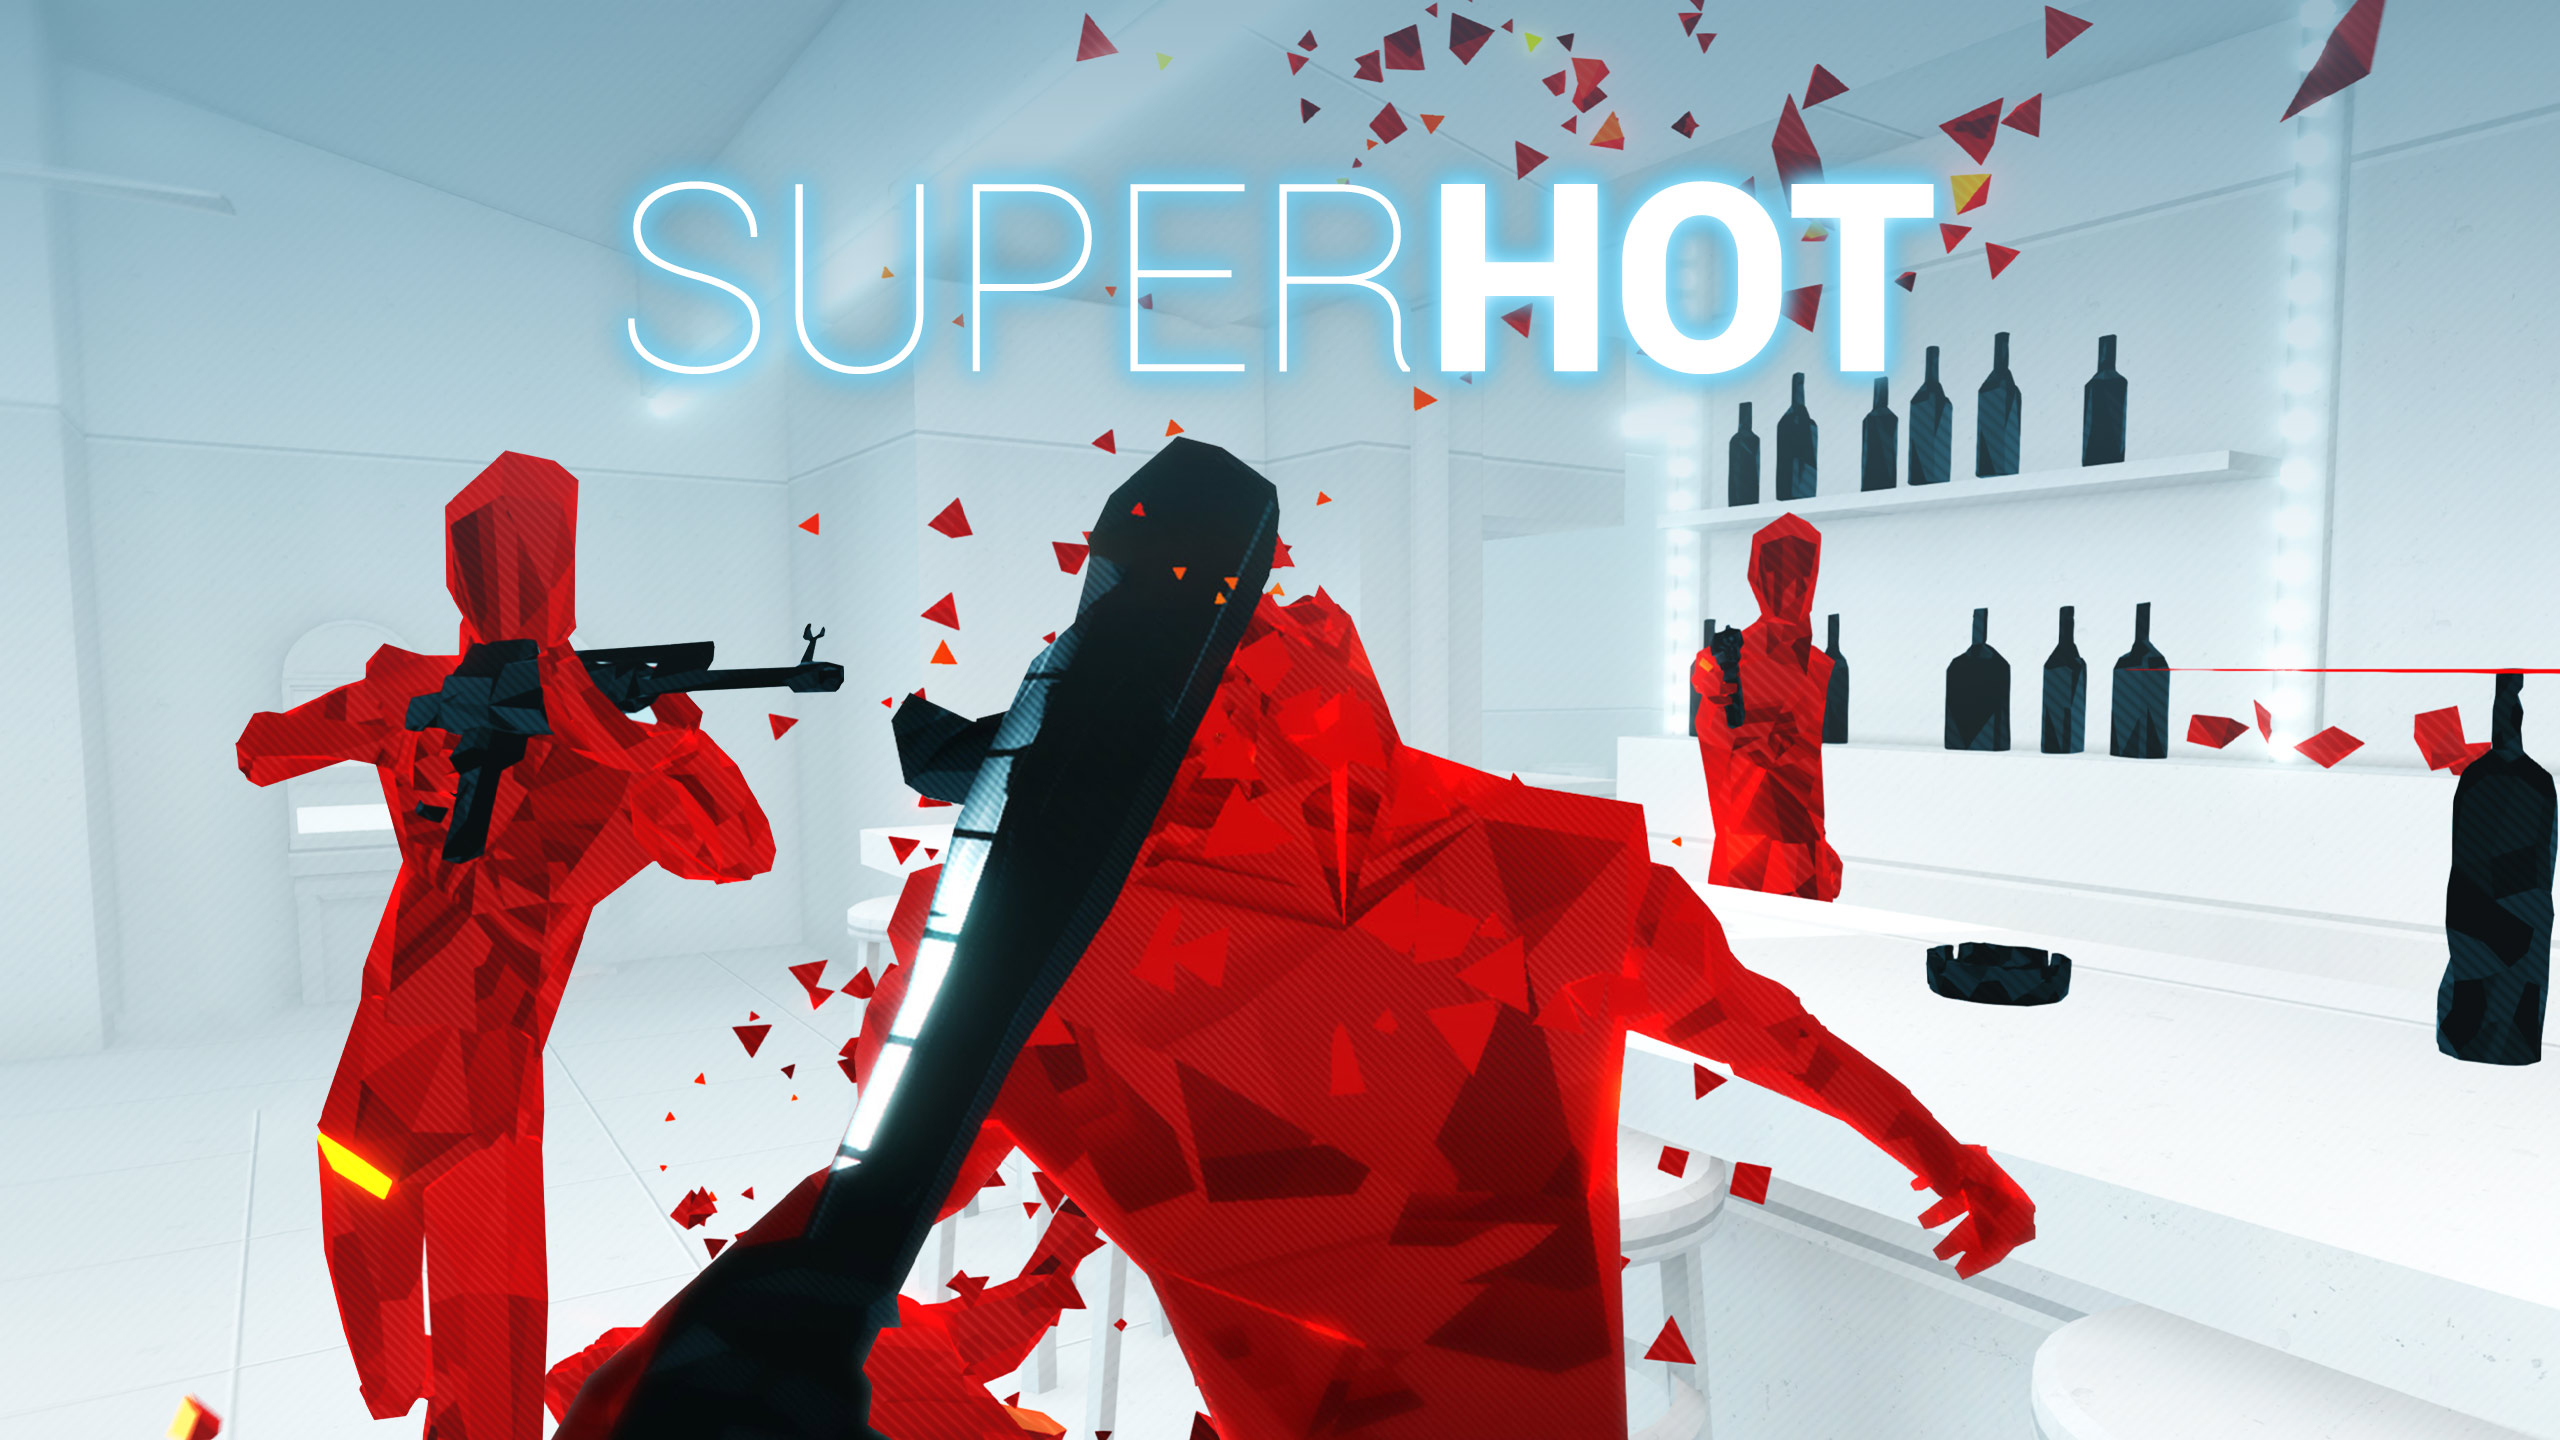 Superhot free full pc game for download